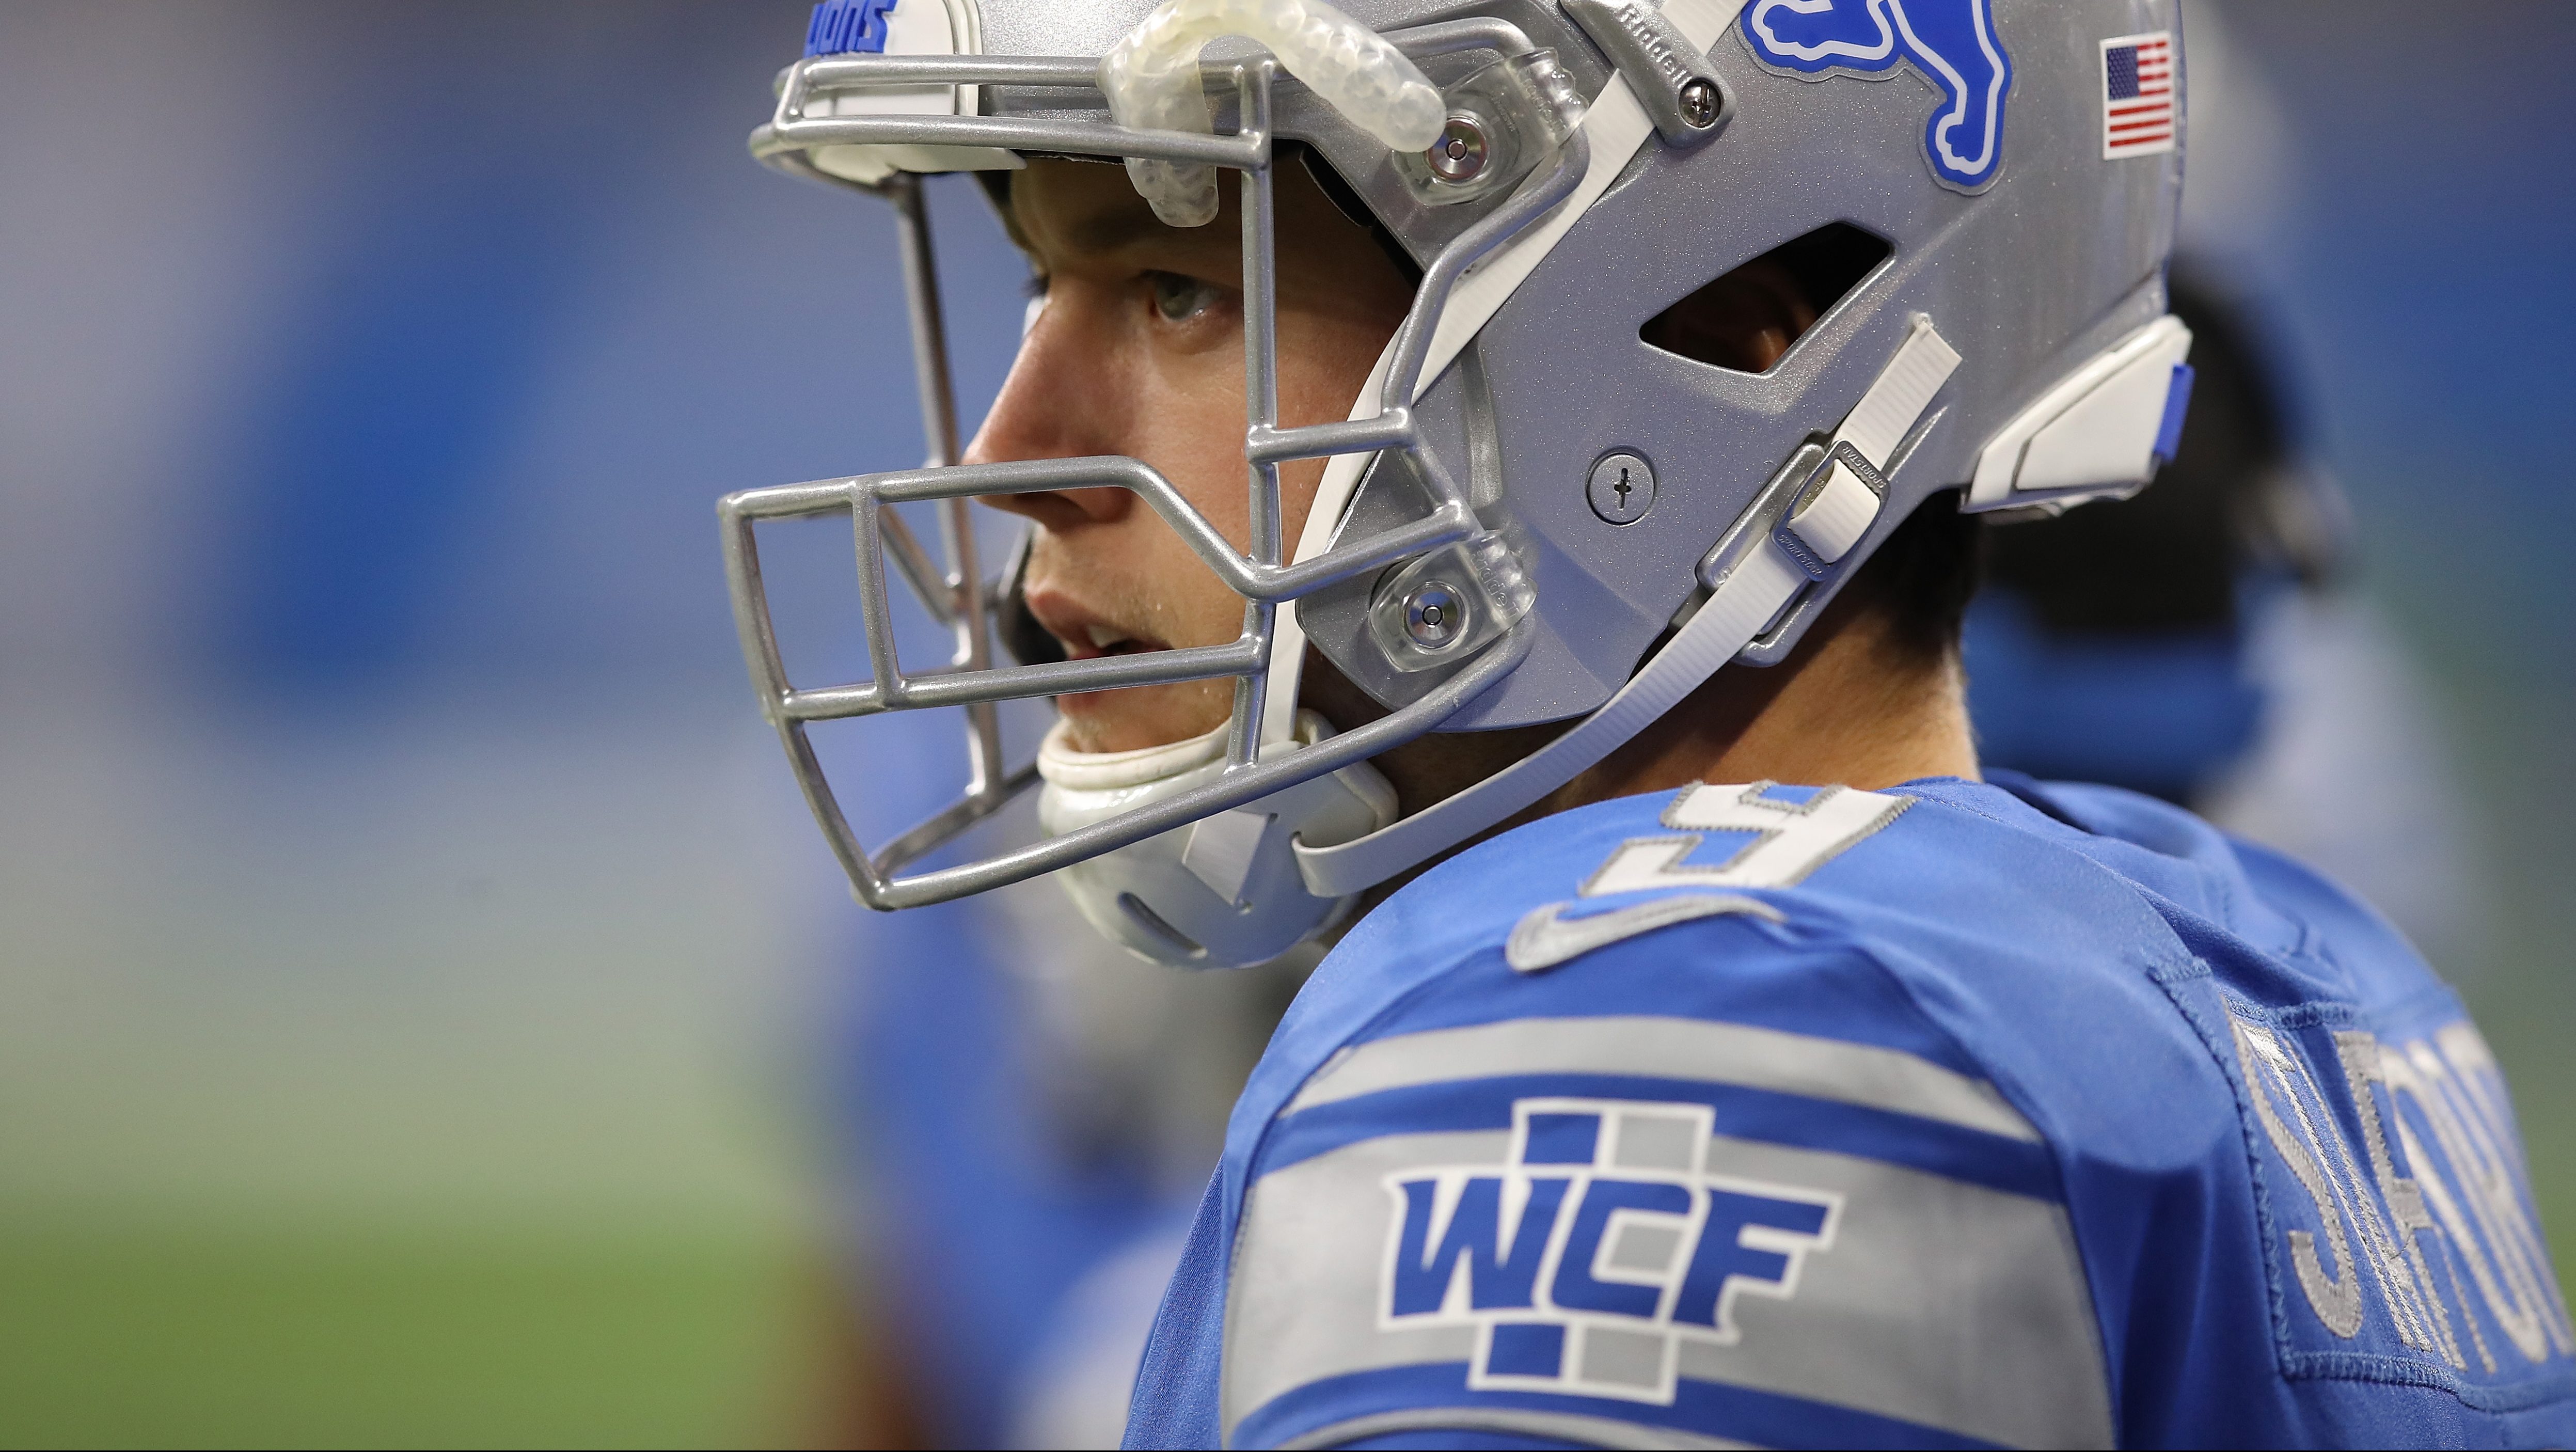 Detroit Lions WCF: What It Stands For